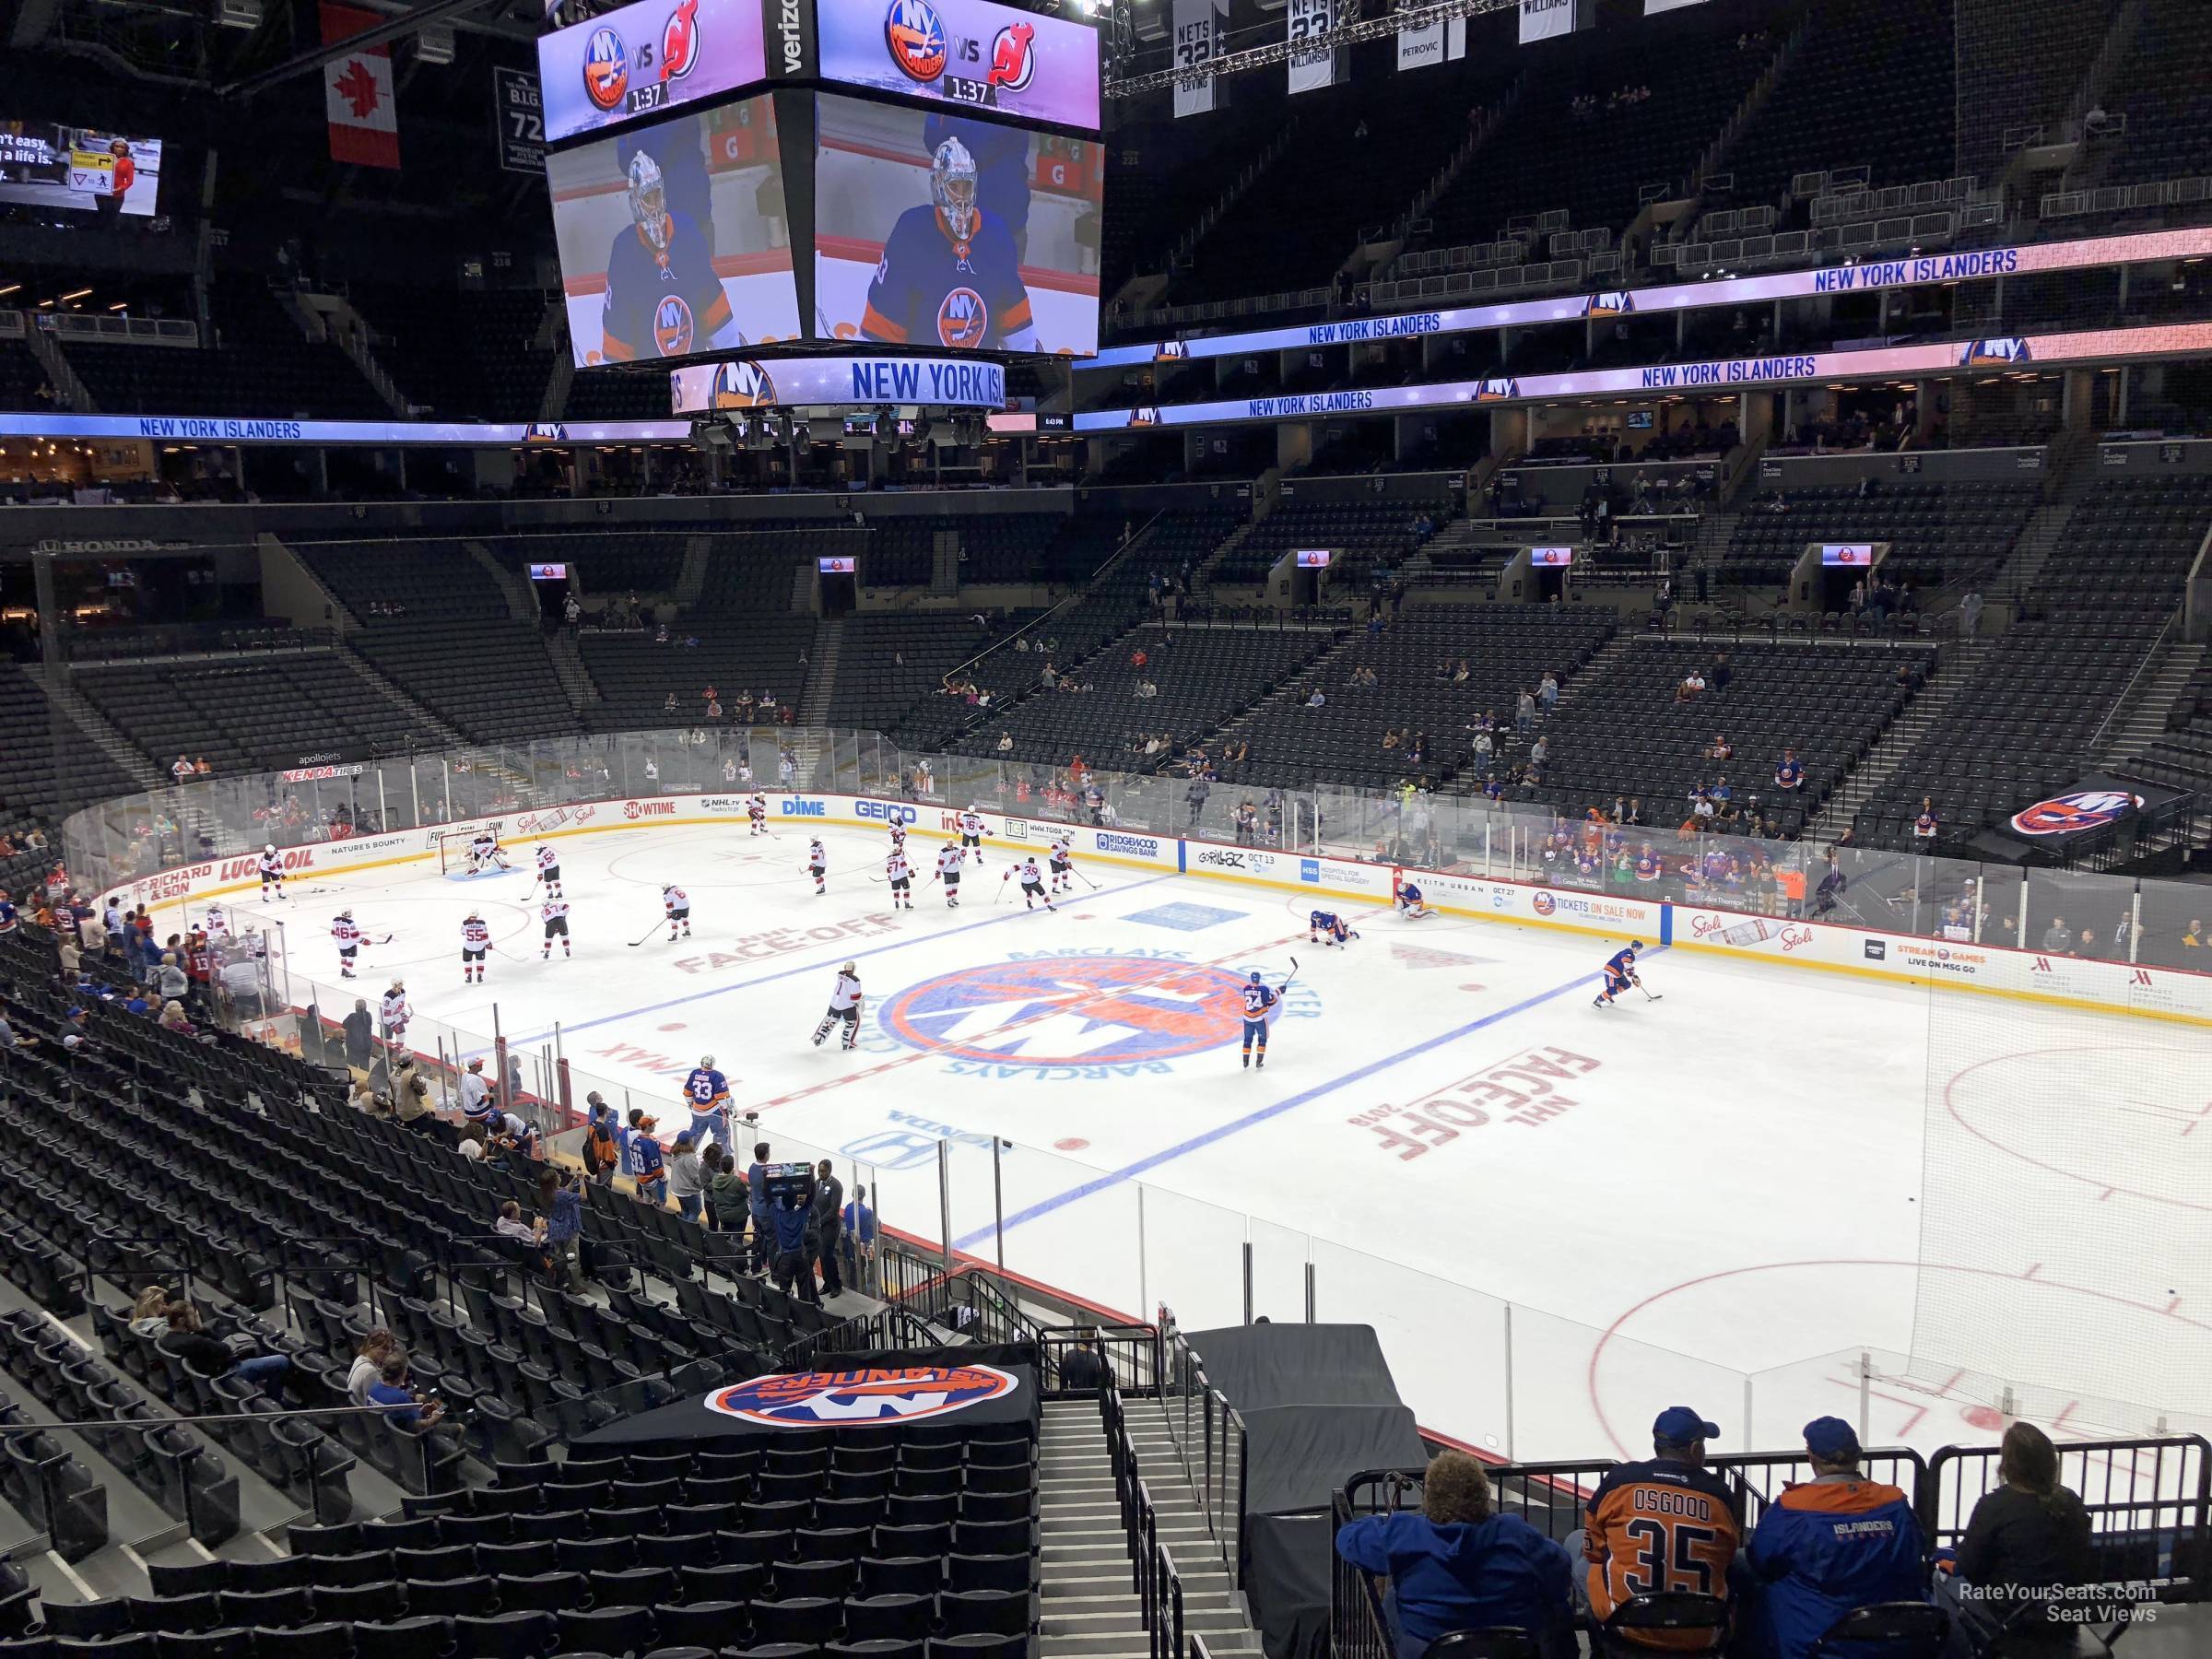 Barclays Center Islanders Seating Chart